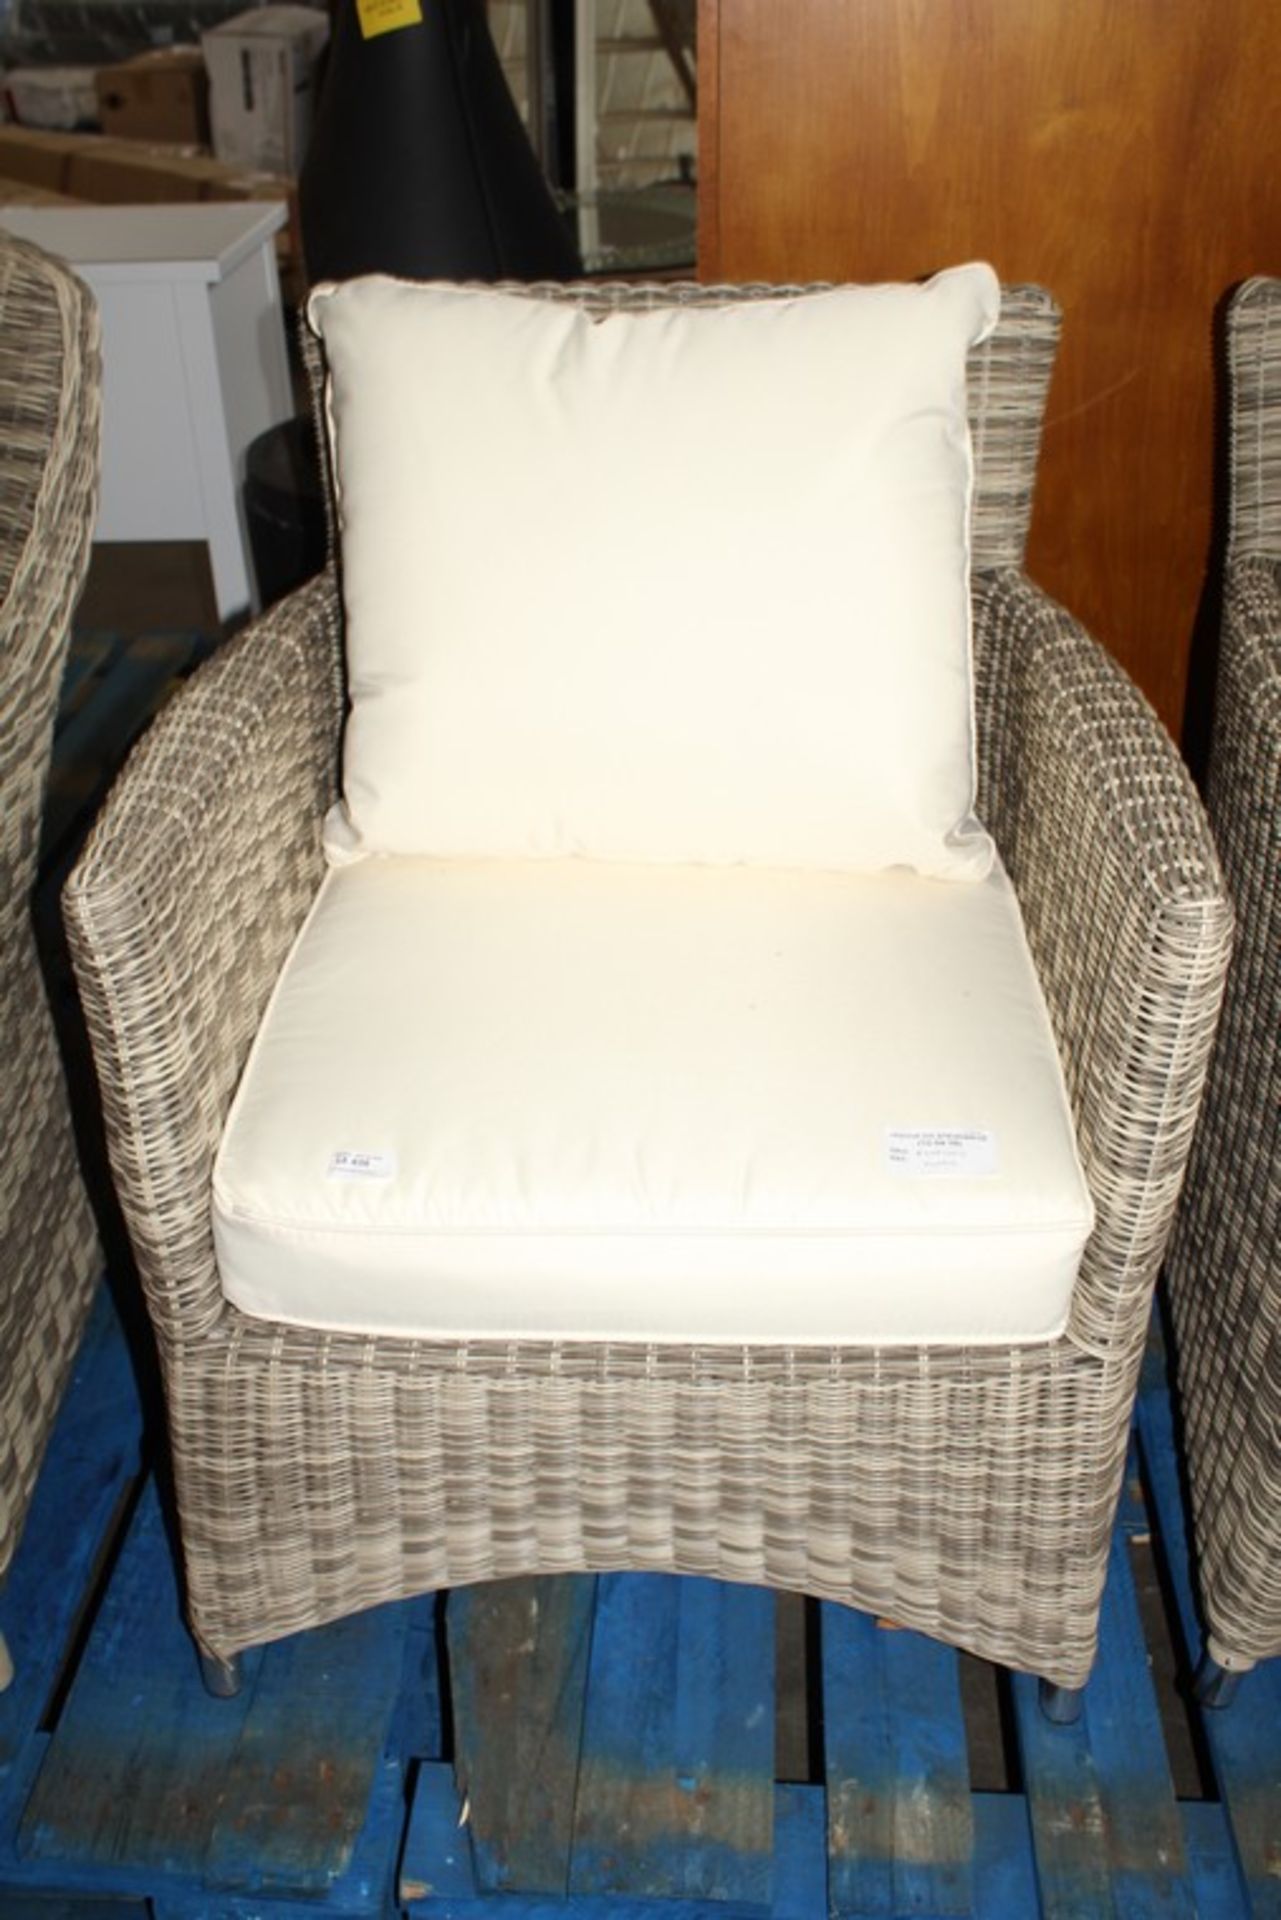 1 x DANTE DINING ARM CHAIR (10.04.18) *PLEASE NOTE THAT THE BID PRICE IS MULTIPLIED BY THE NUMBER OF